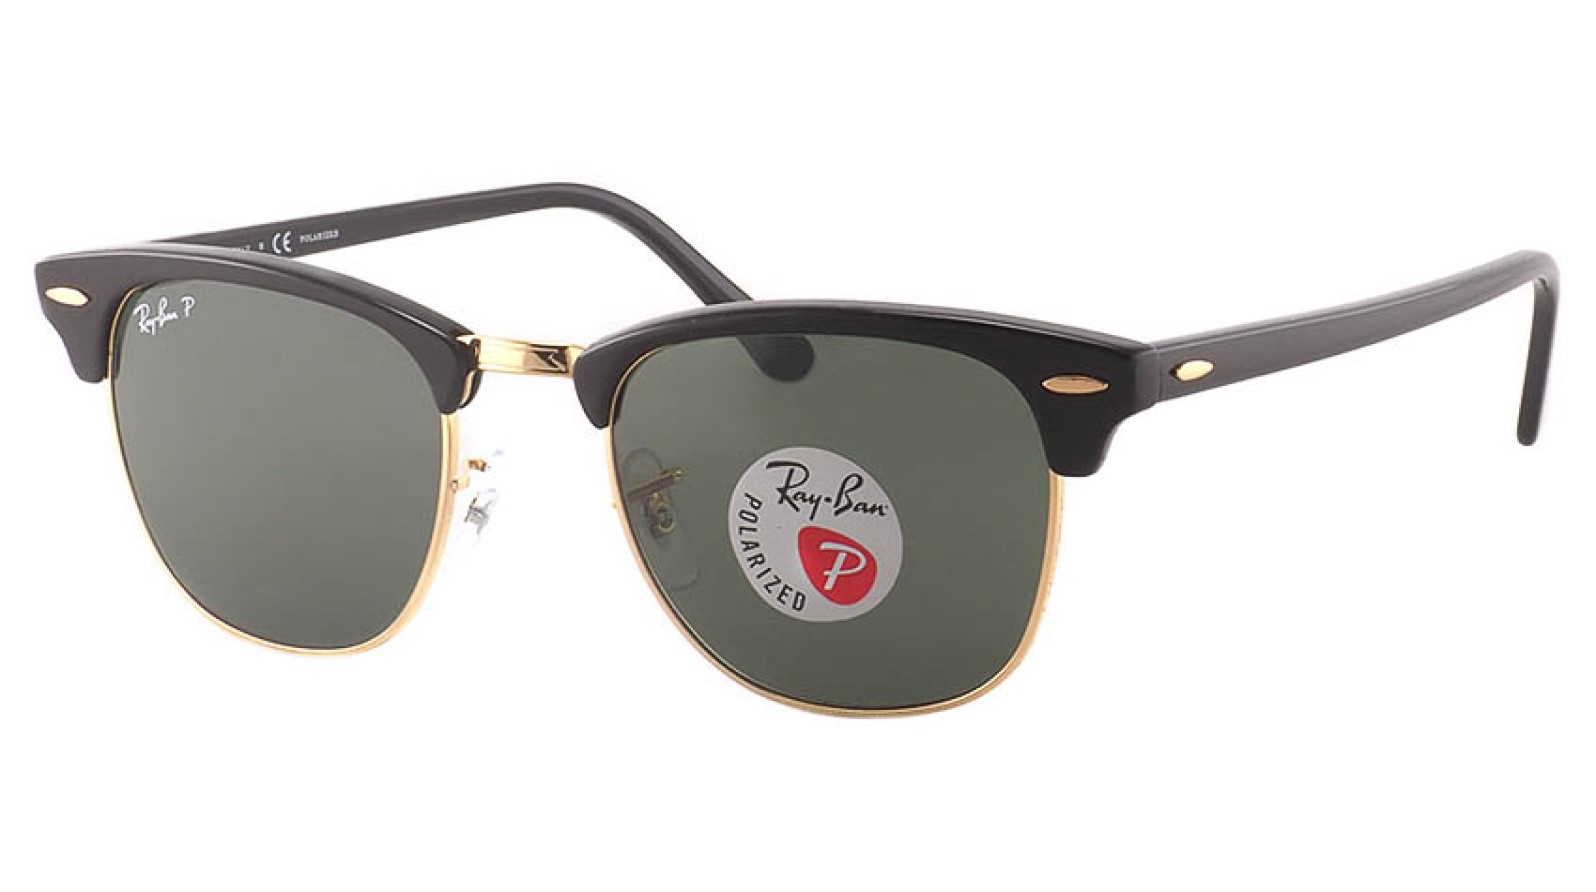 Ray-Ban Clubmaster RB 3016 901/58 ray ban clubmaster rx 5154 5884